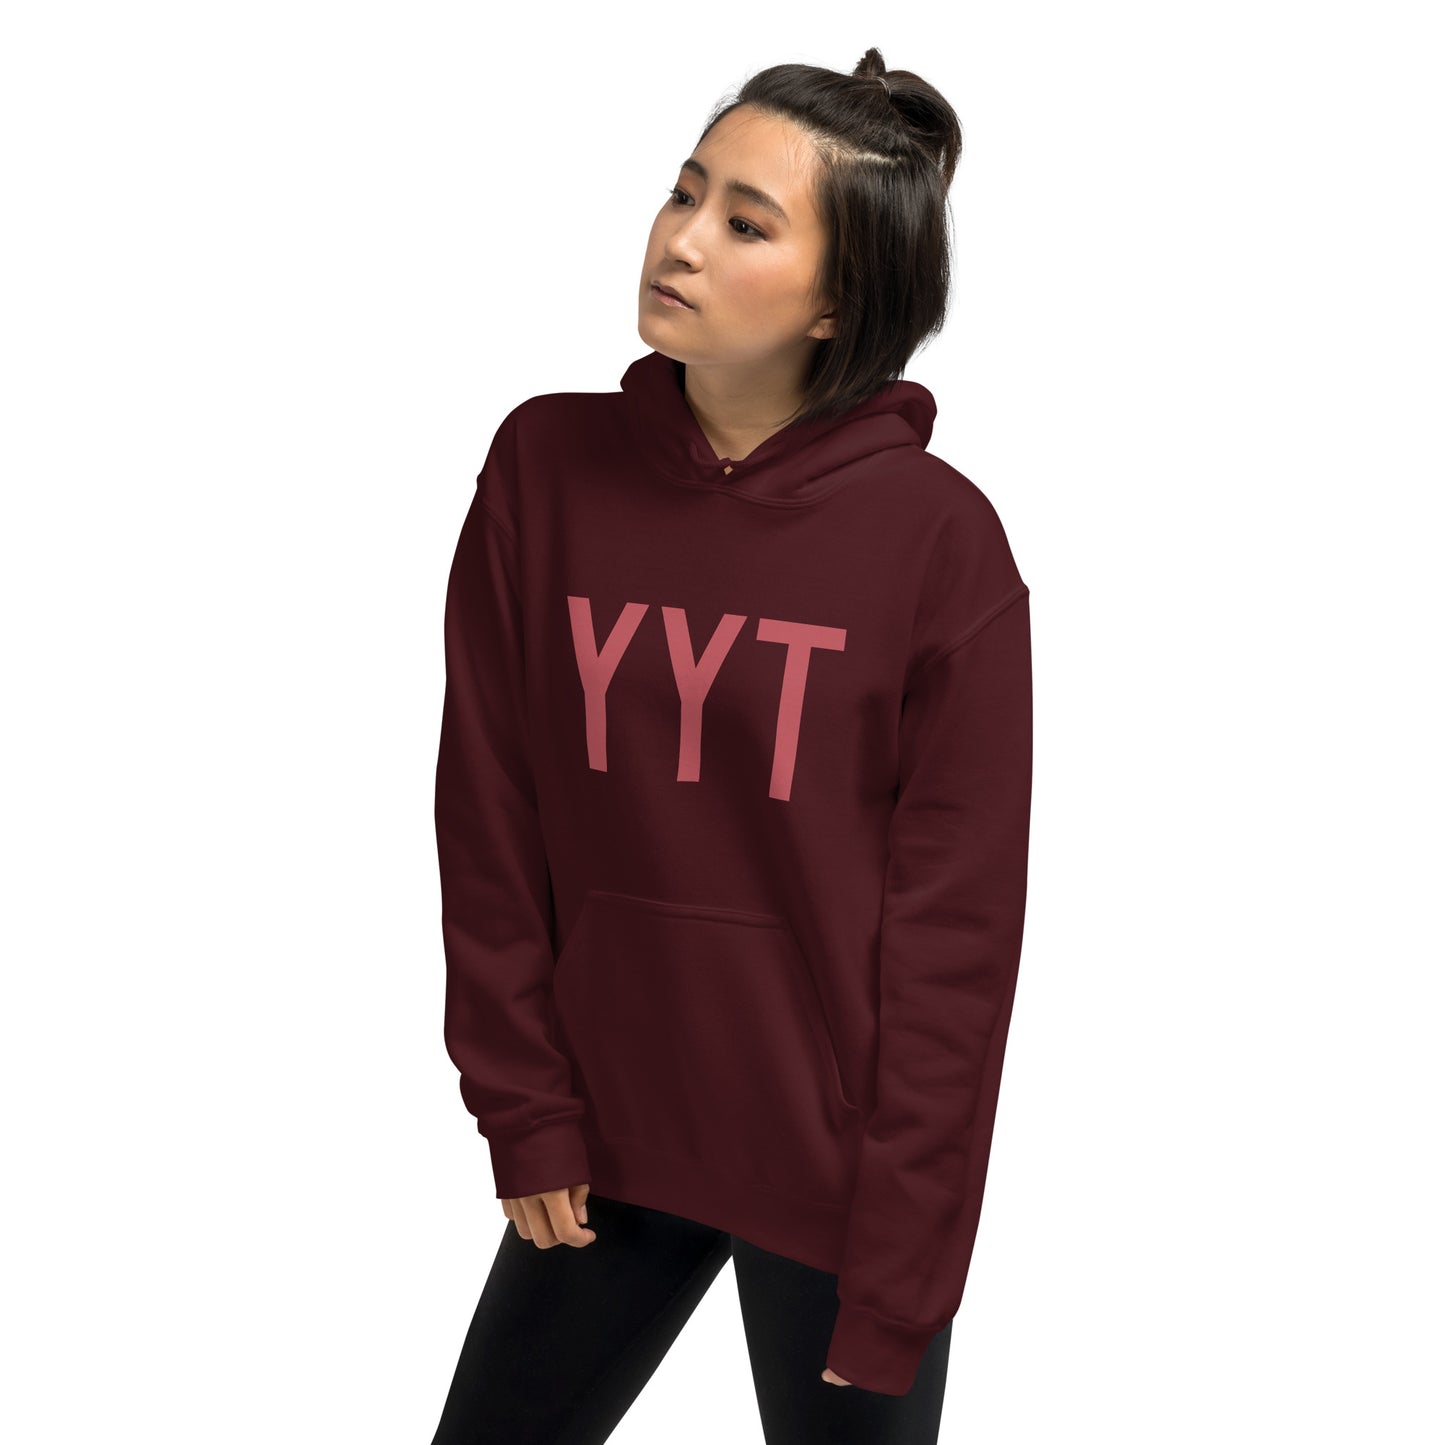 Aviation Enthusiast Hoodie - Deep Pink Graphic • YYT St. John's • YHM Designs - Image 10